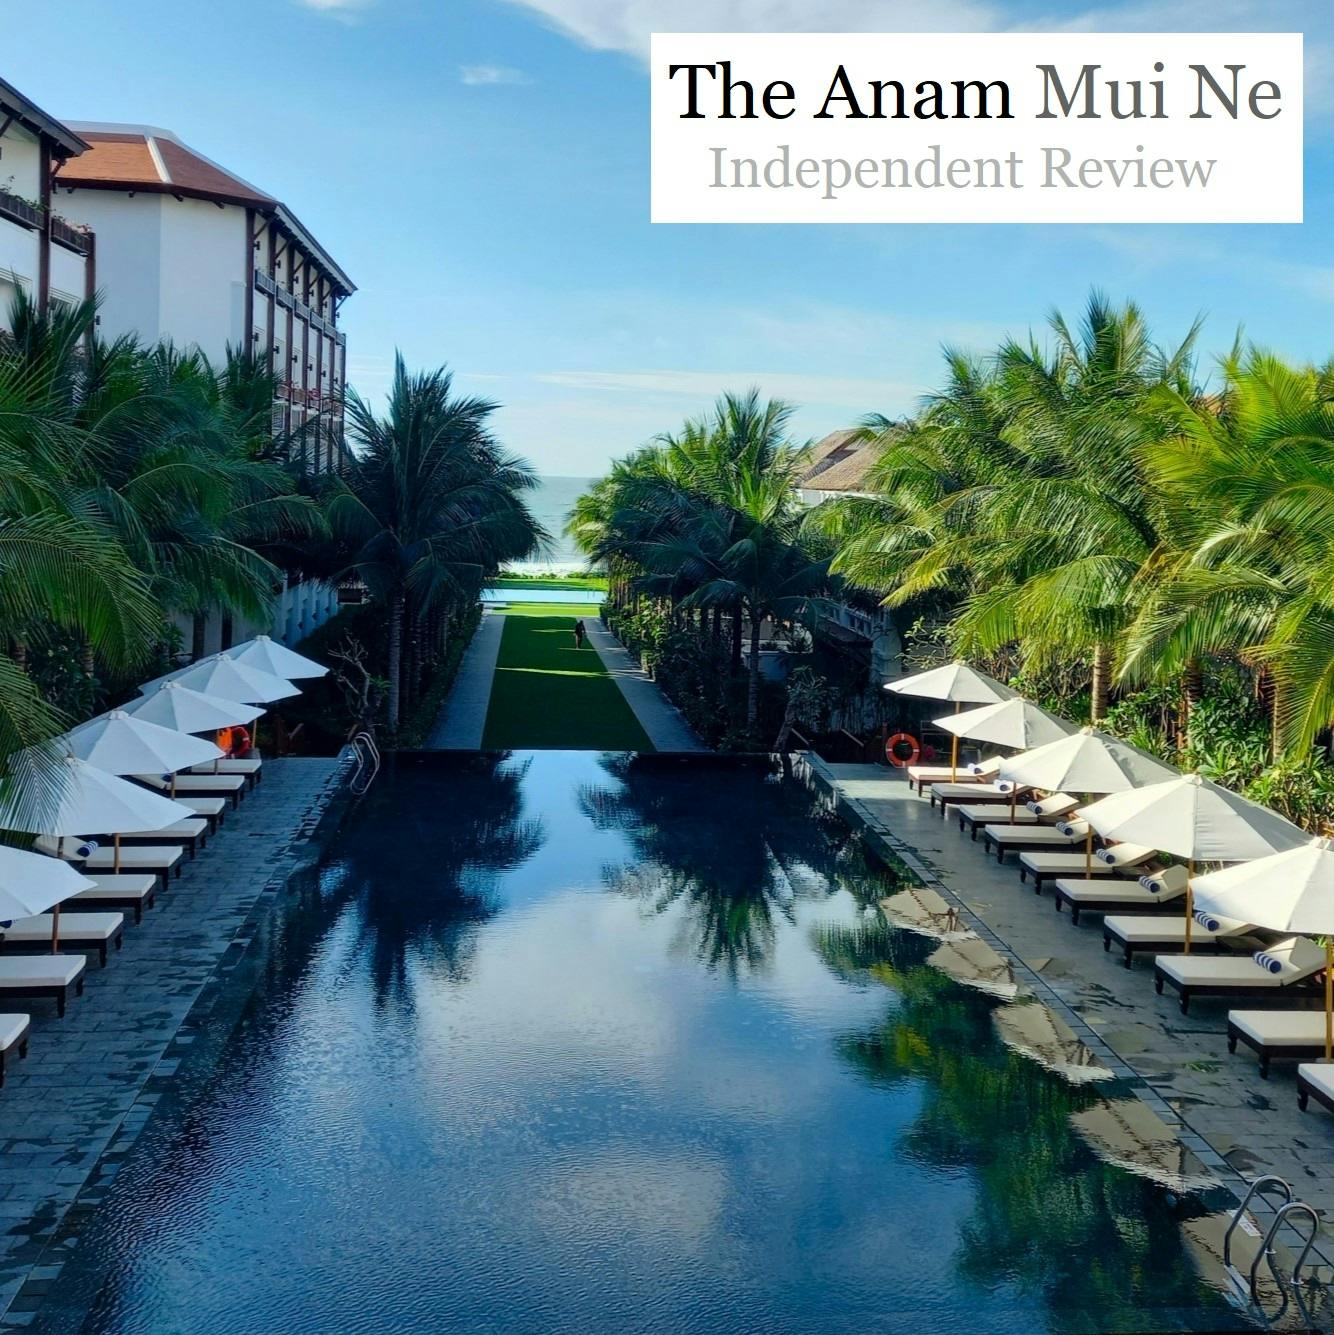 The Anam Mui Ne, Independent Review